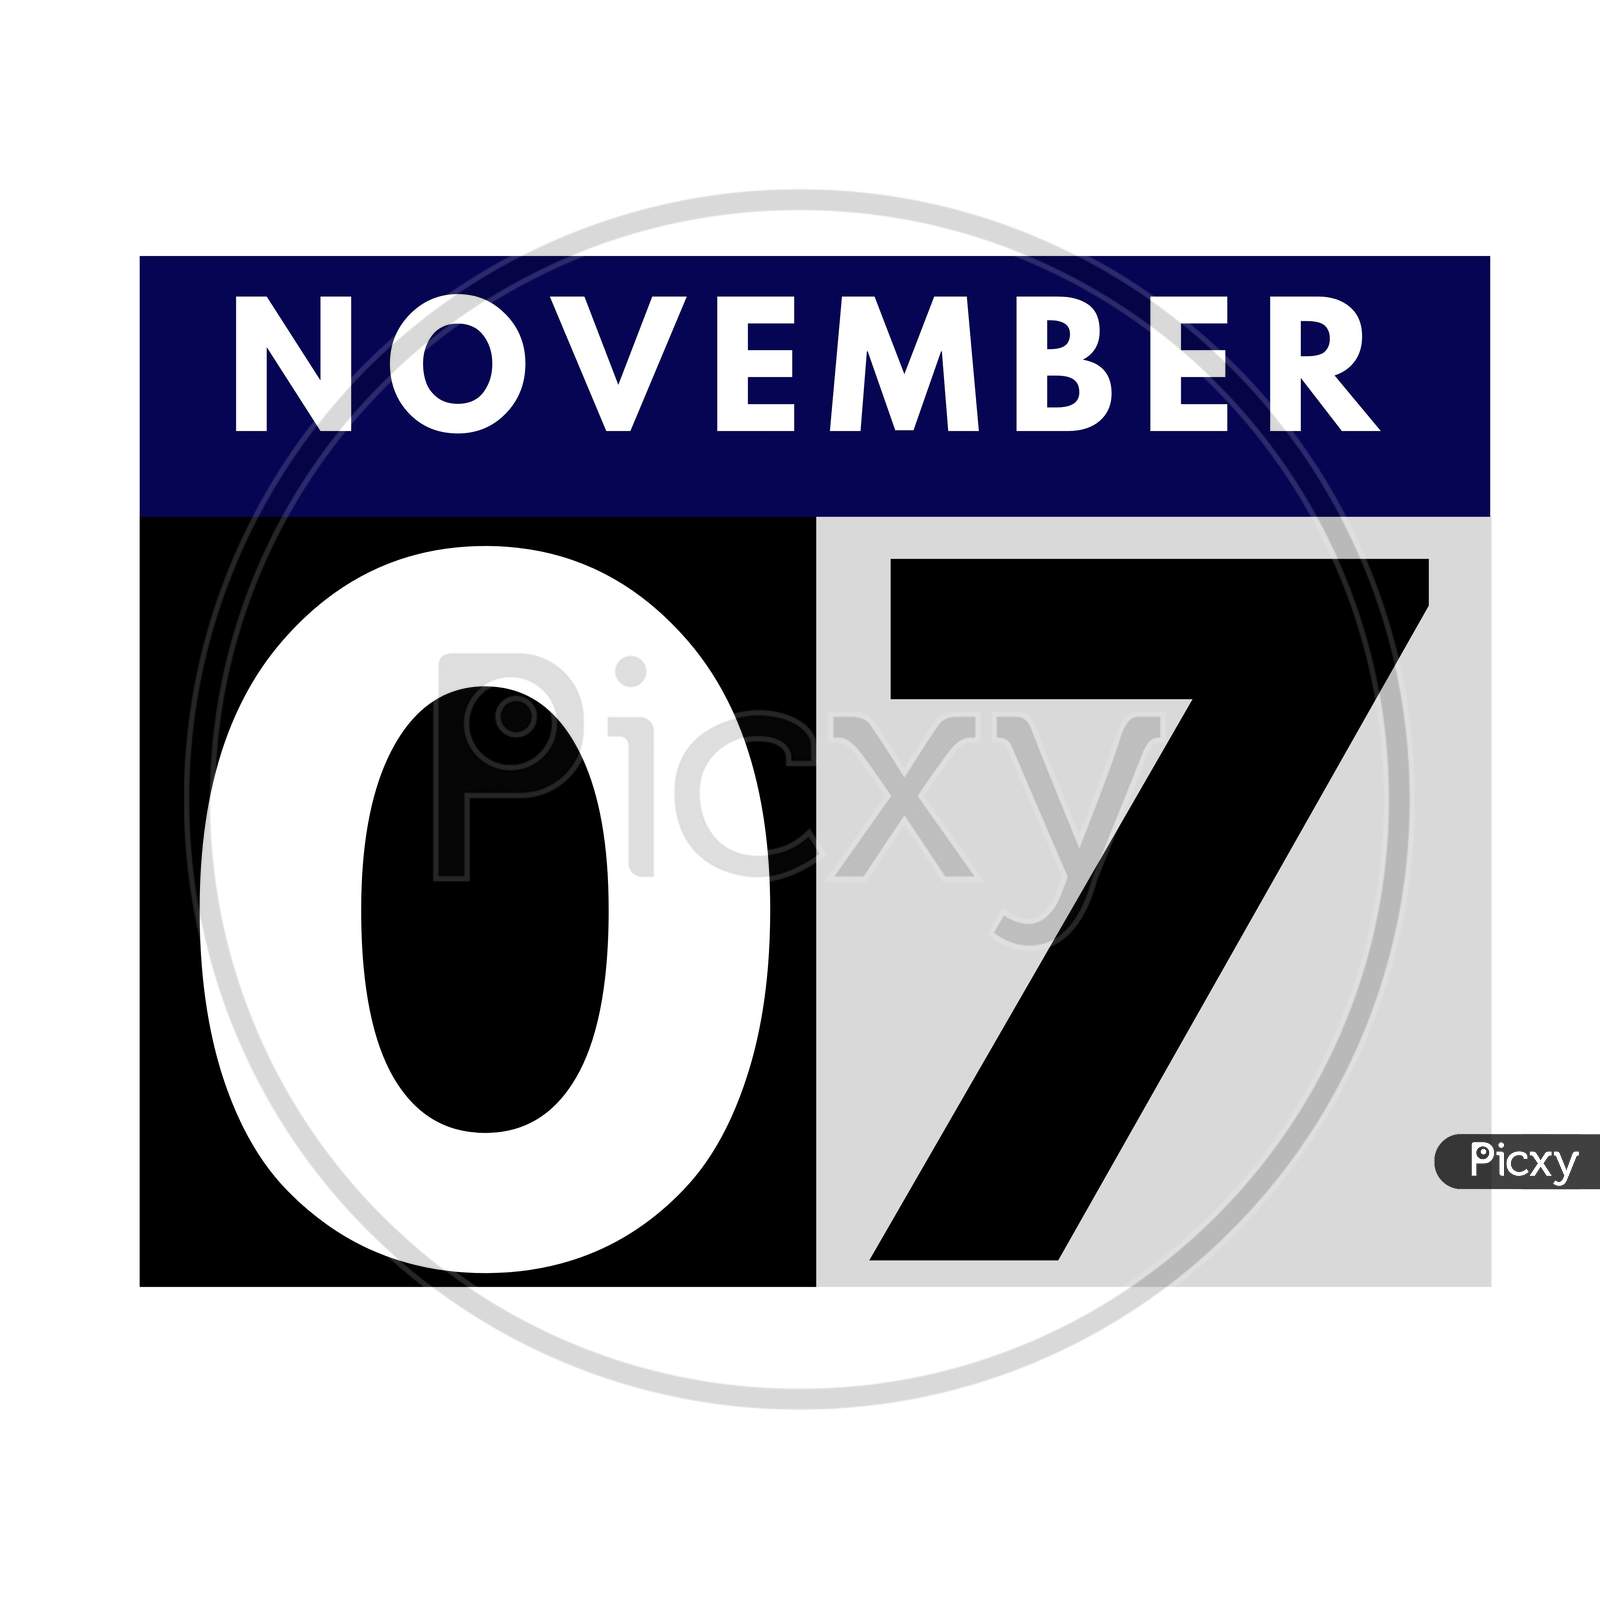 November 7 . Flat Daily Calendar Icon .Date ,Day, Month .Calendar For The Month Of November